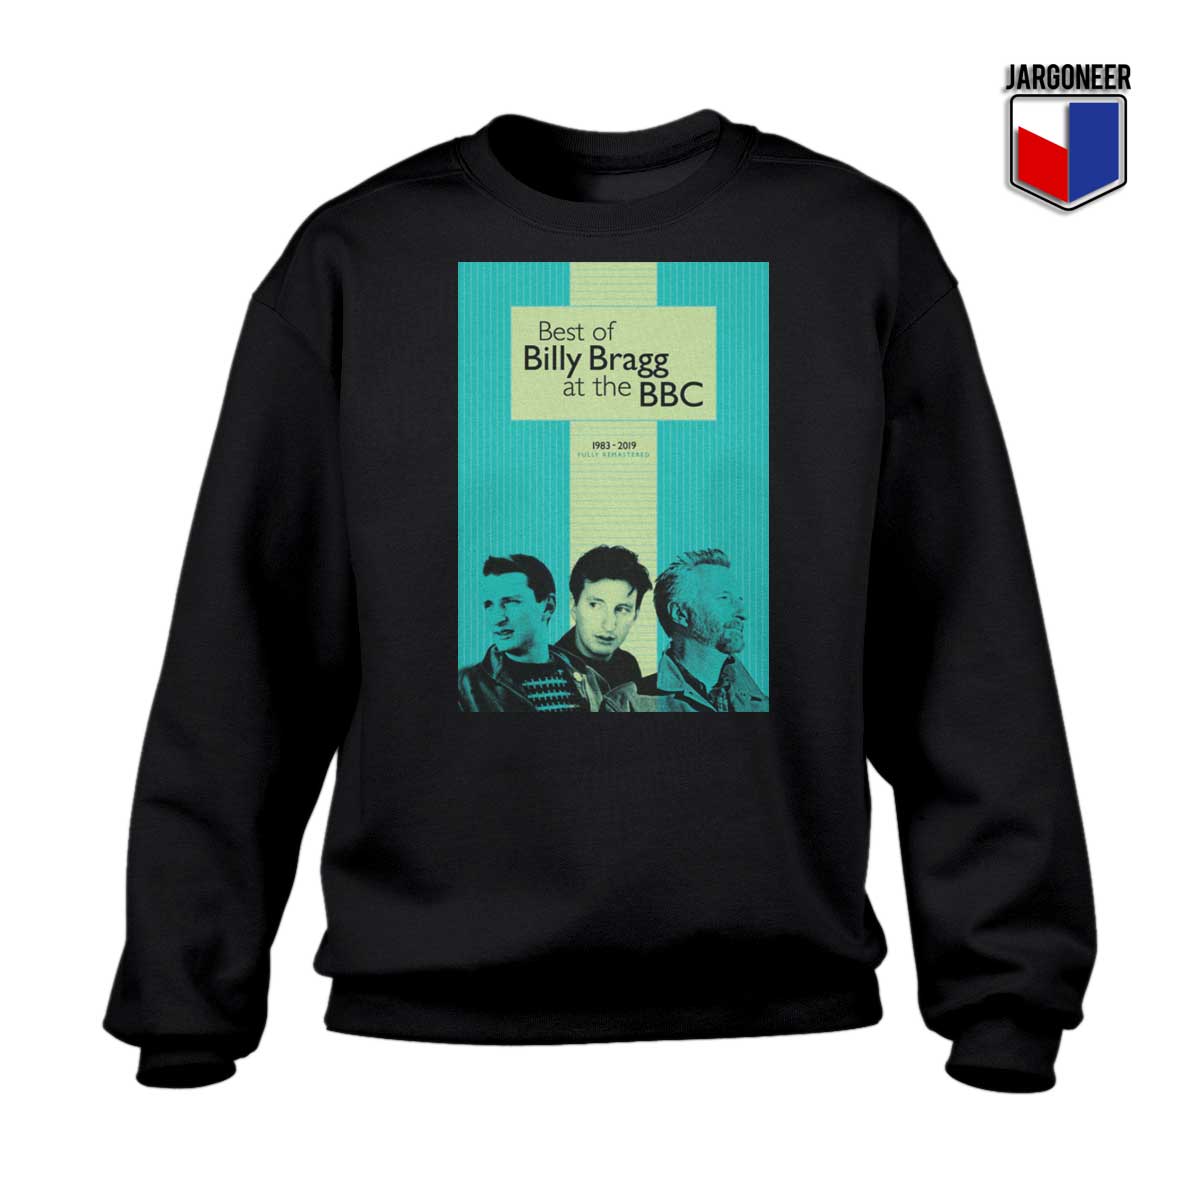 The Best of Billy Bragg at the BBC Sweatshirt - Shop Unique Graphic Cool Shirt Designs